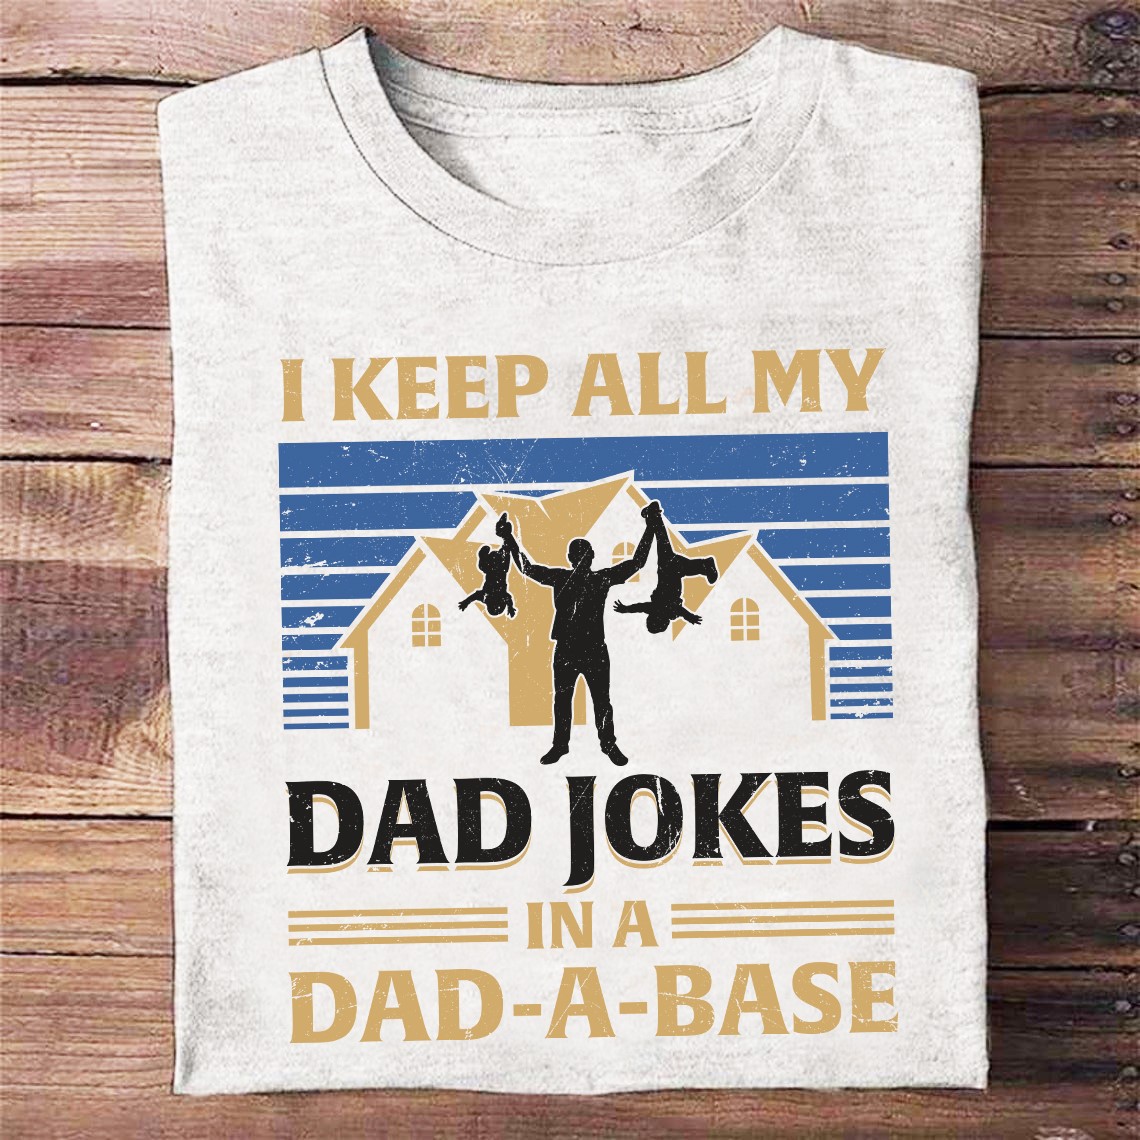 I keep all my dad jokes in a dad-a-base - Father's day gift, dad and kids